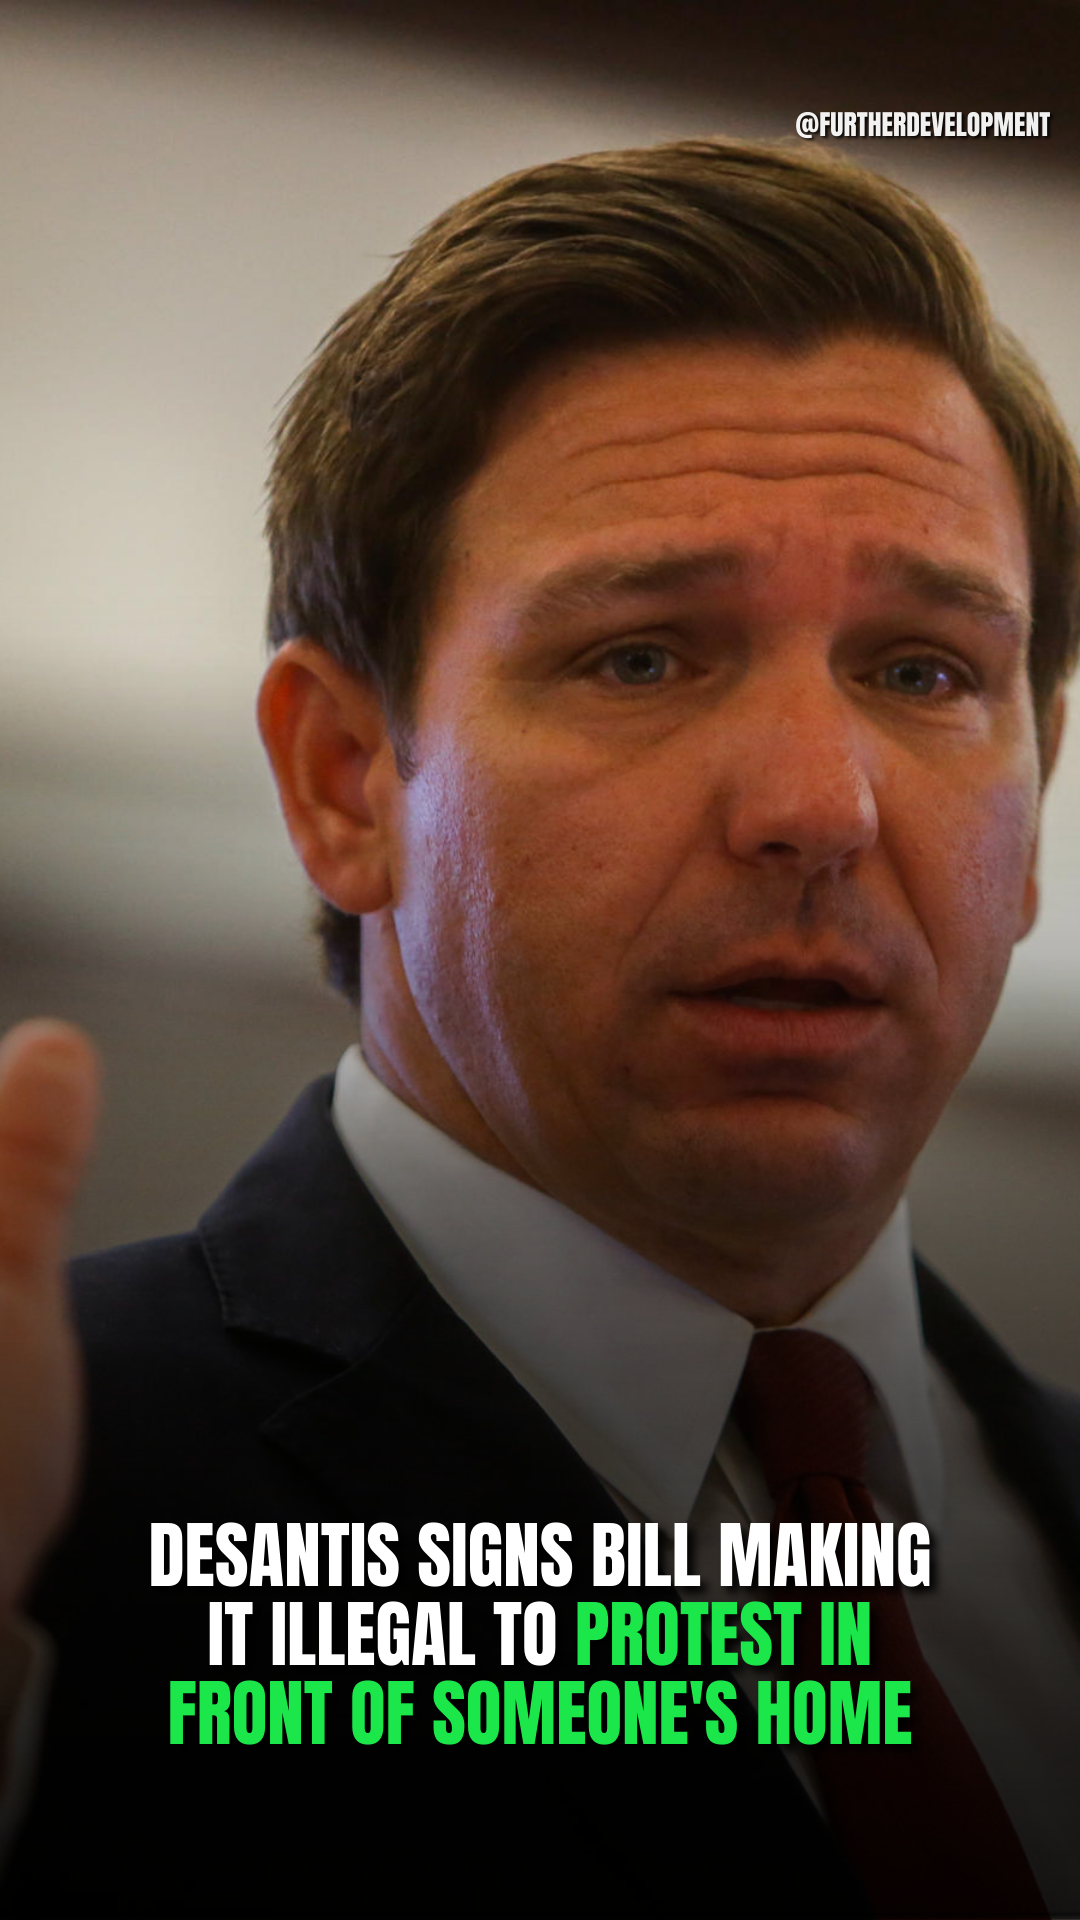 DeSANTIS signs bill making it illegal to protest in front of someone's home